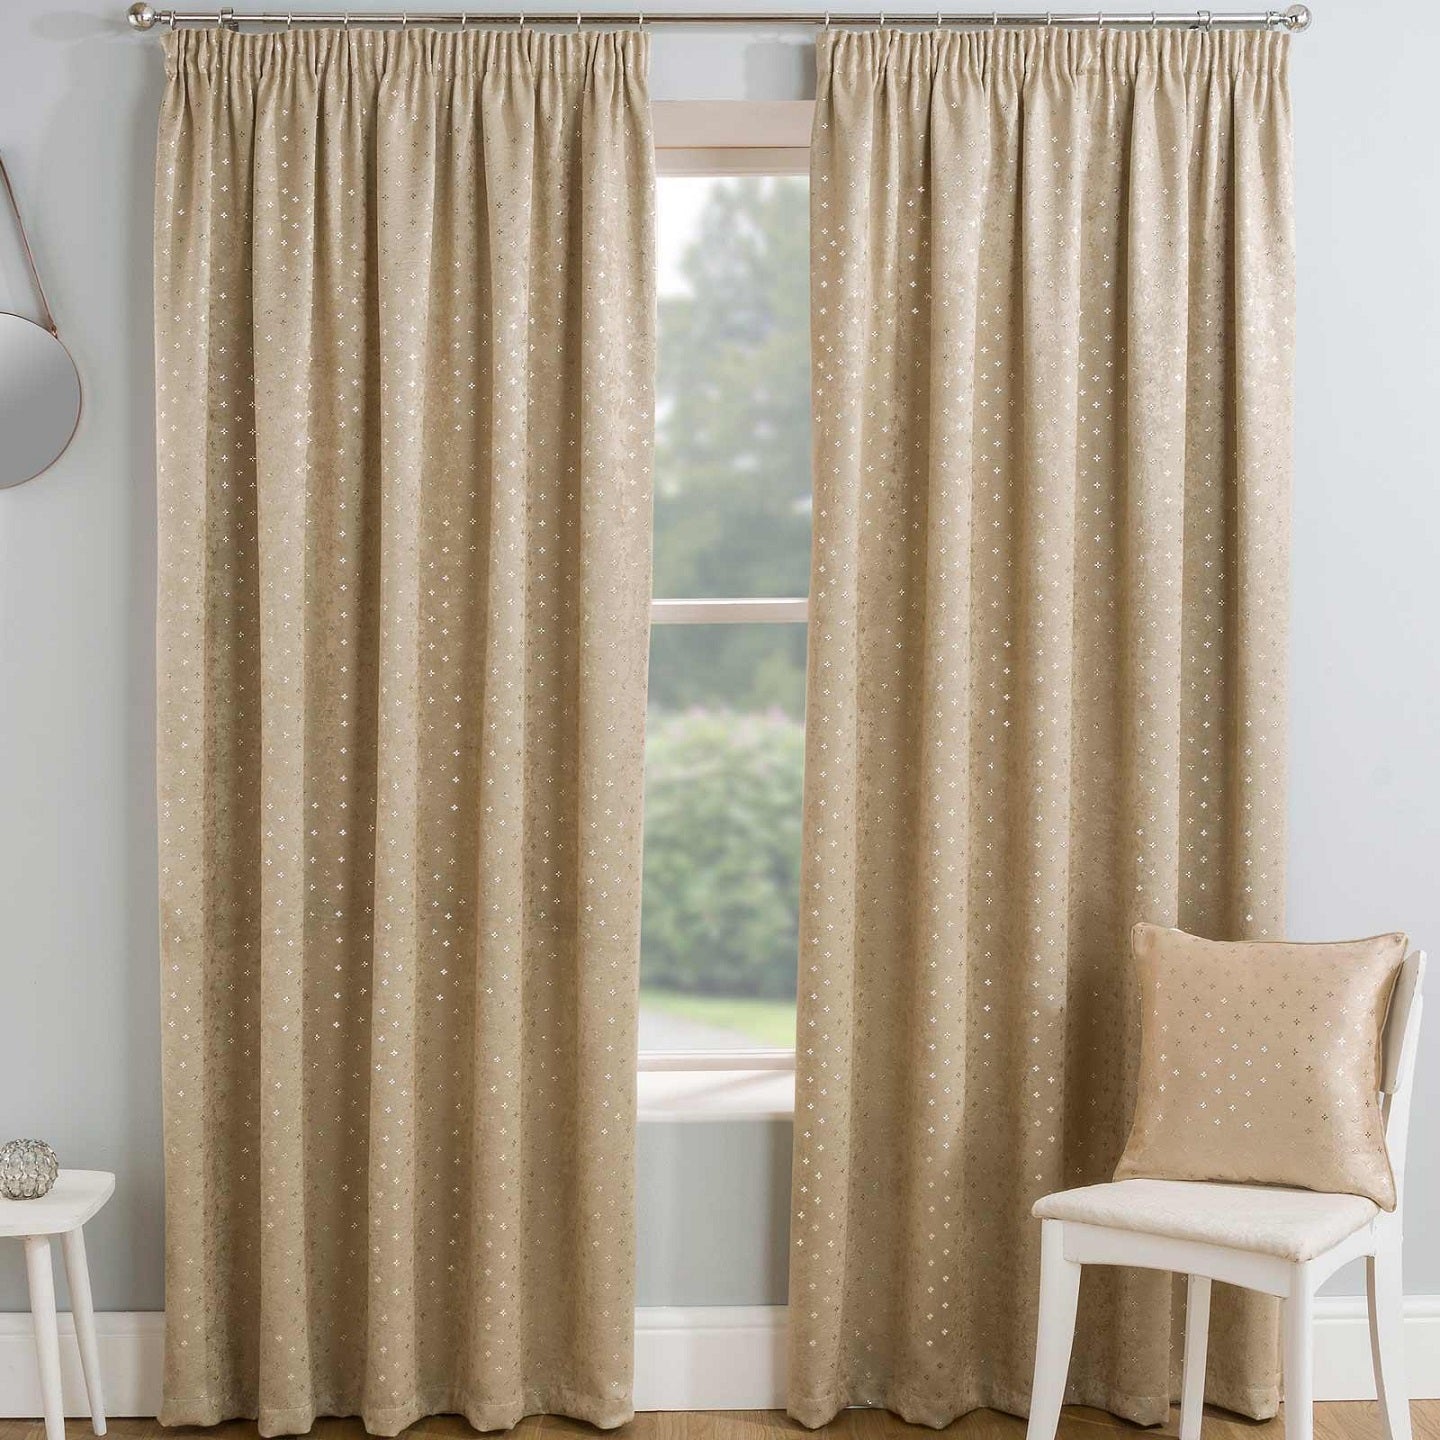 66x72" Gemini Blockout Lined Pencil Pleat Curtains - Natural